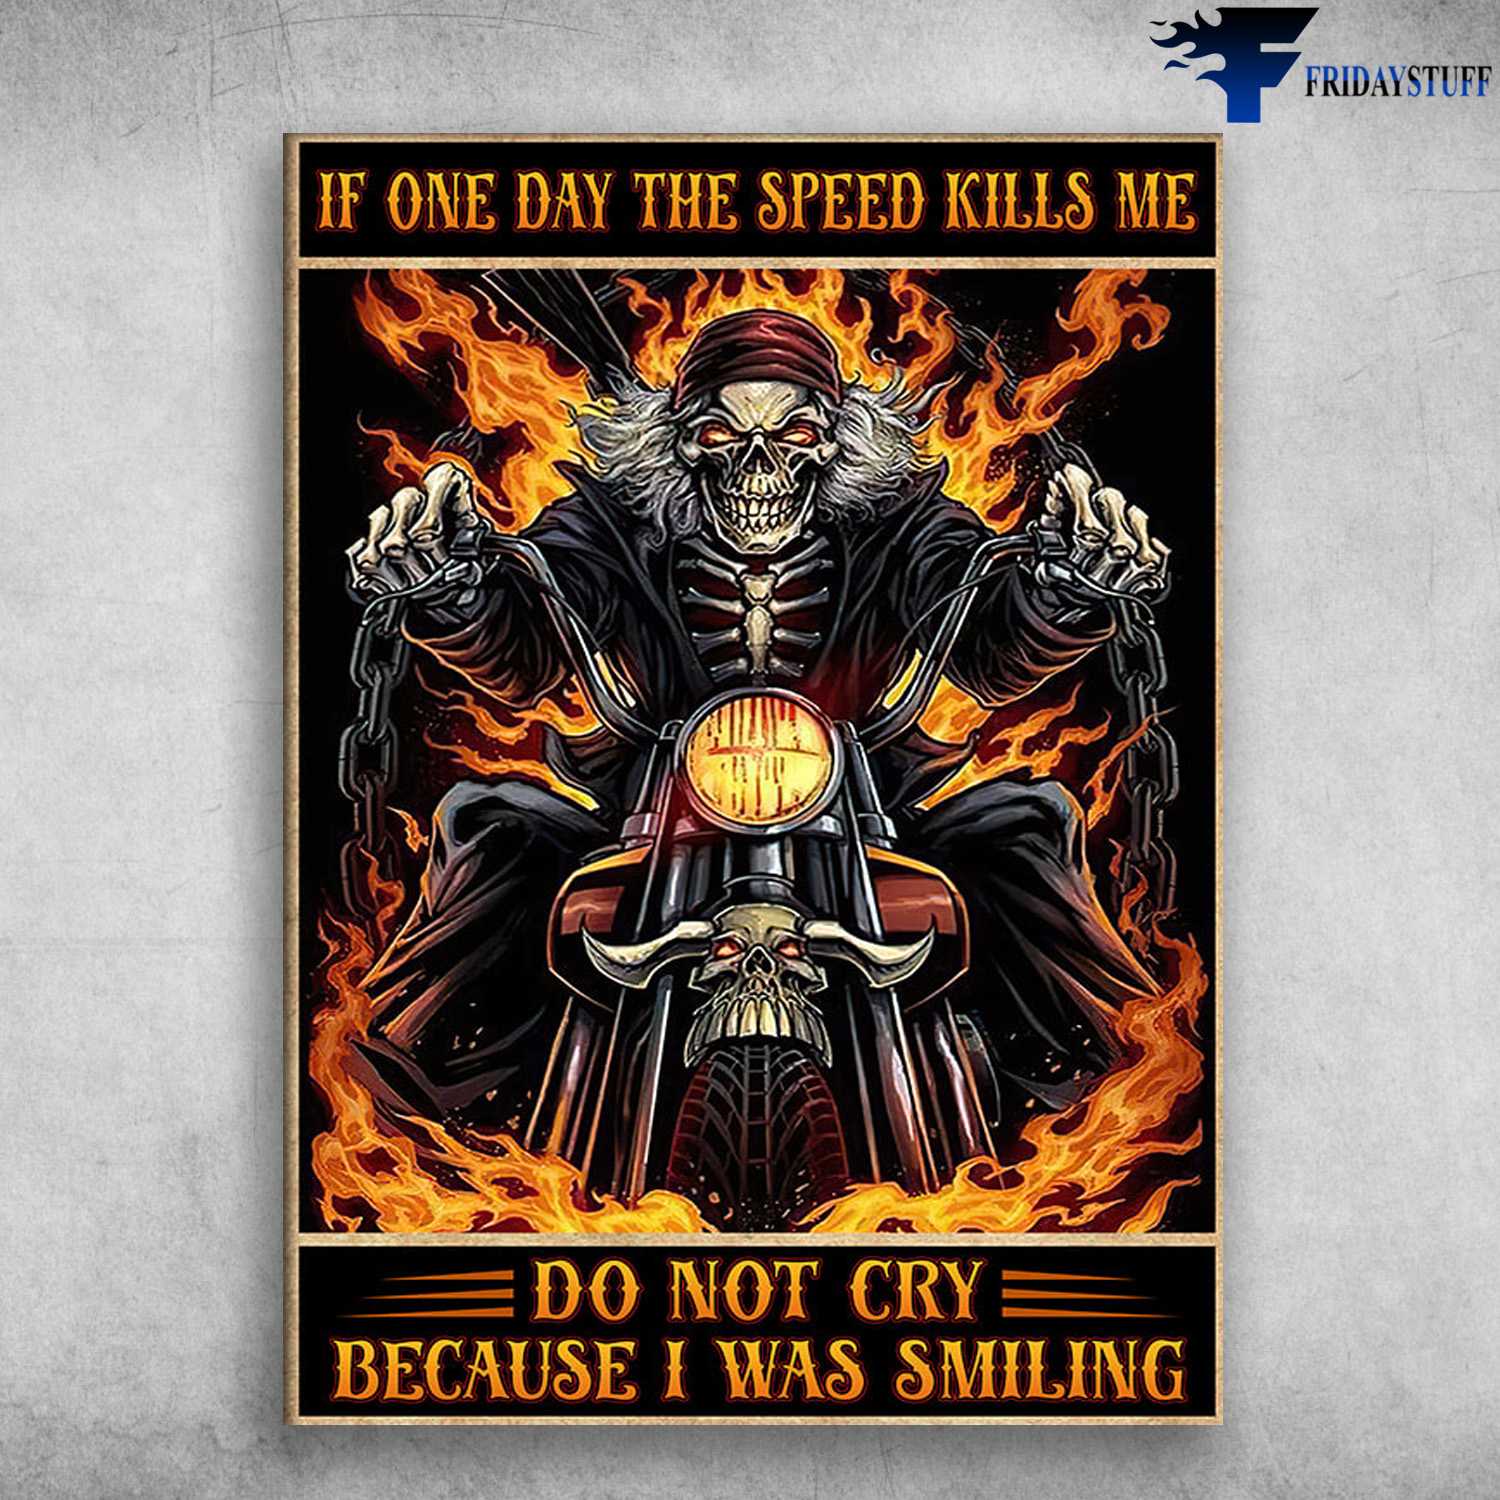 Rider Poster, Motorcycle Lover, If One Day, The Speed Kills Me, Do Not Cry, Because I Was Smiling